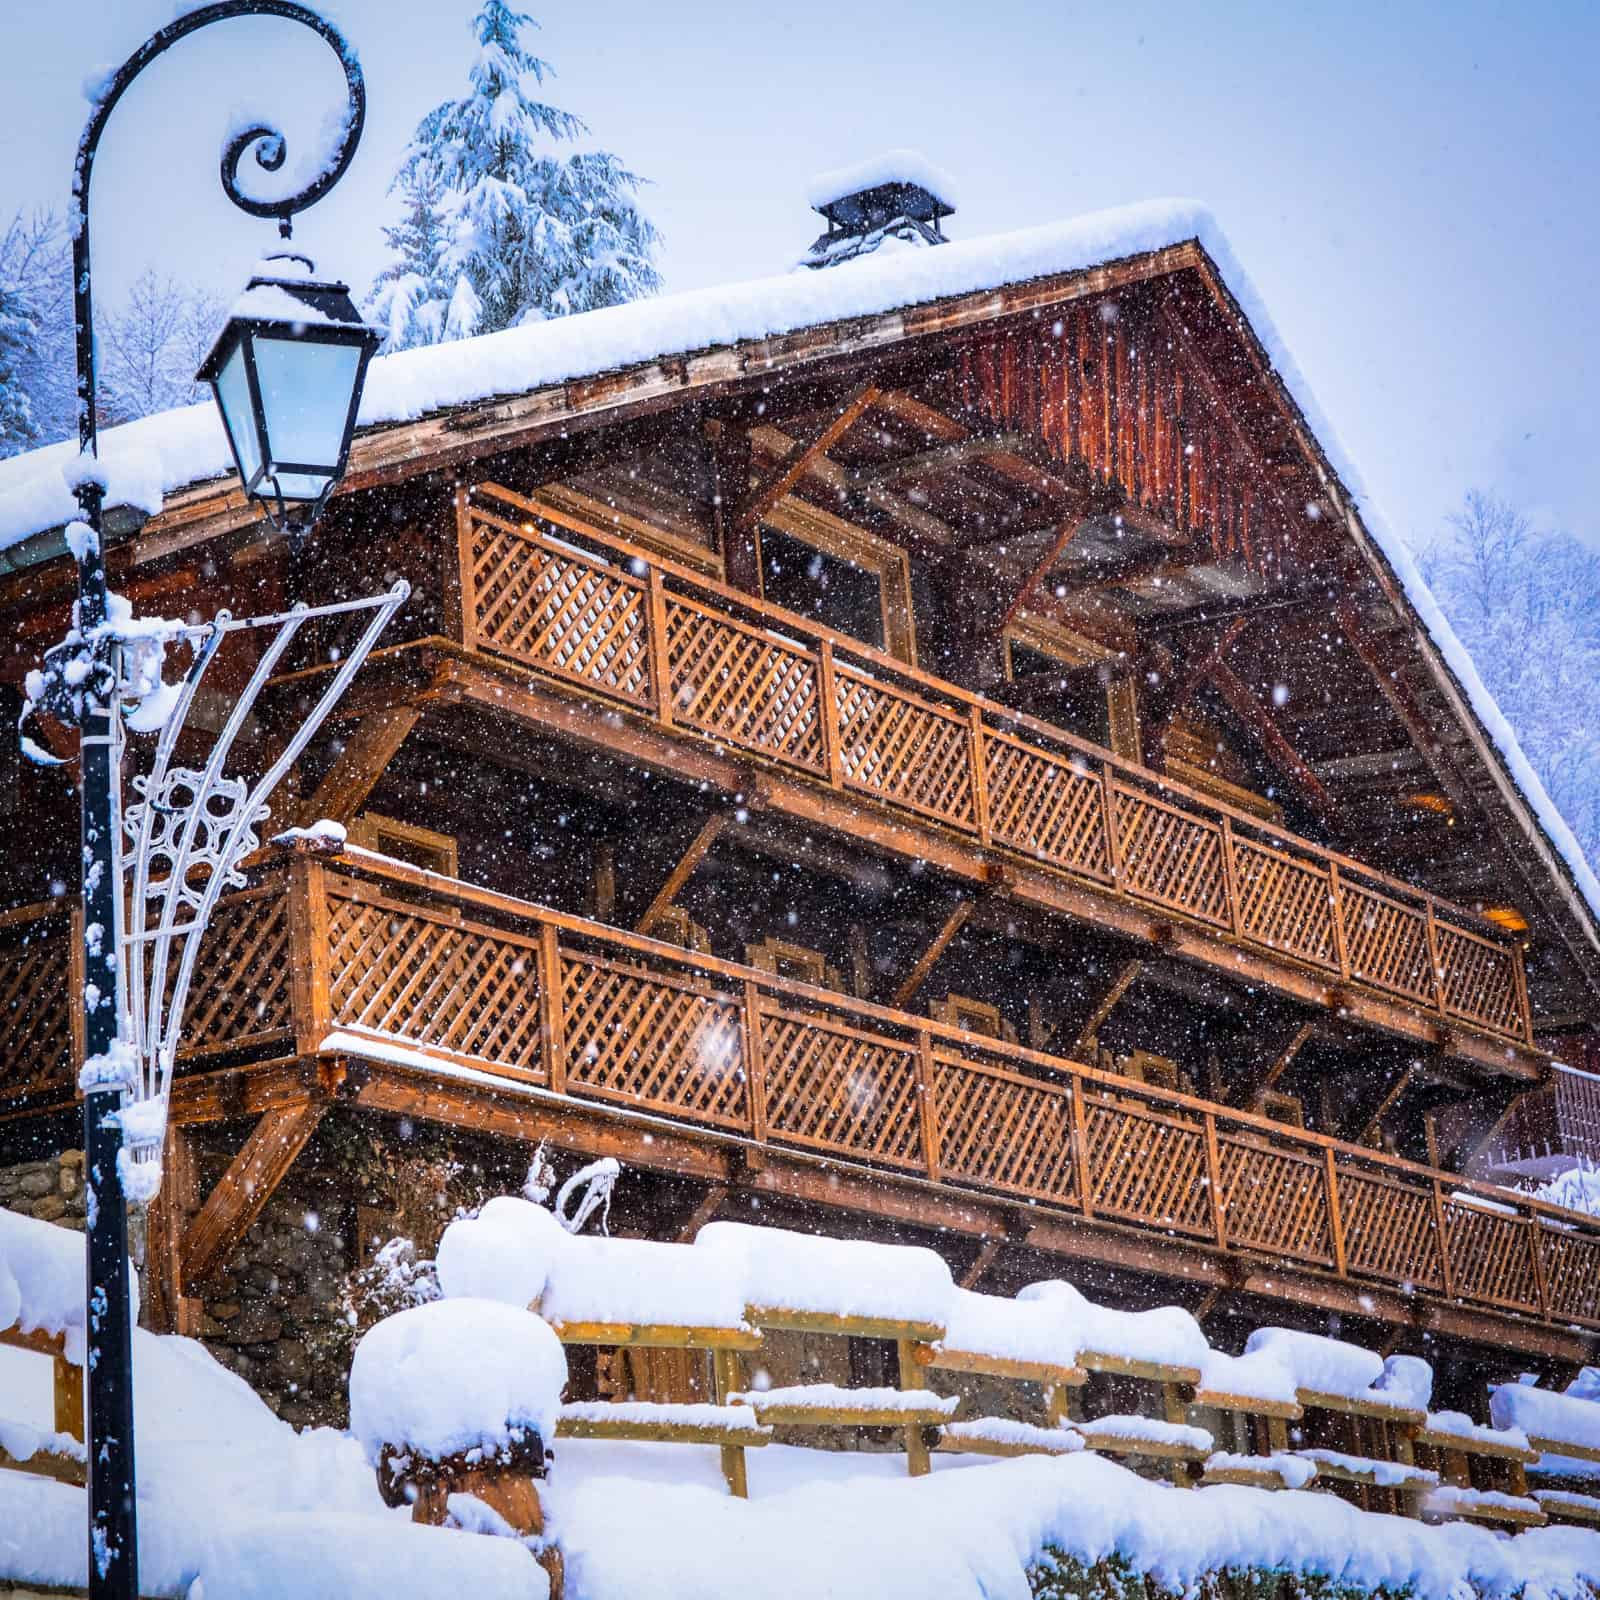 luxury catered ski chalet in snow - La Grange au Merle by Clarian Chalets